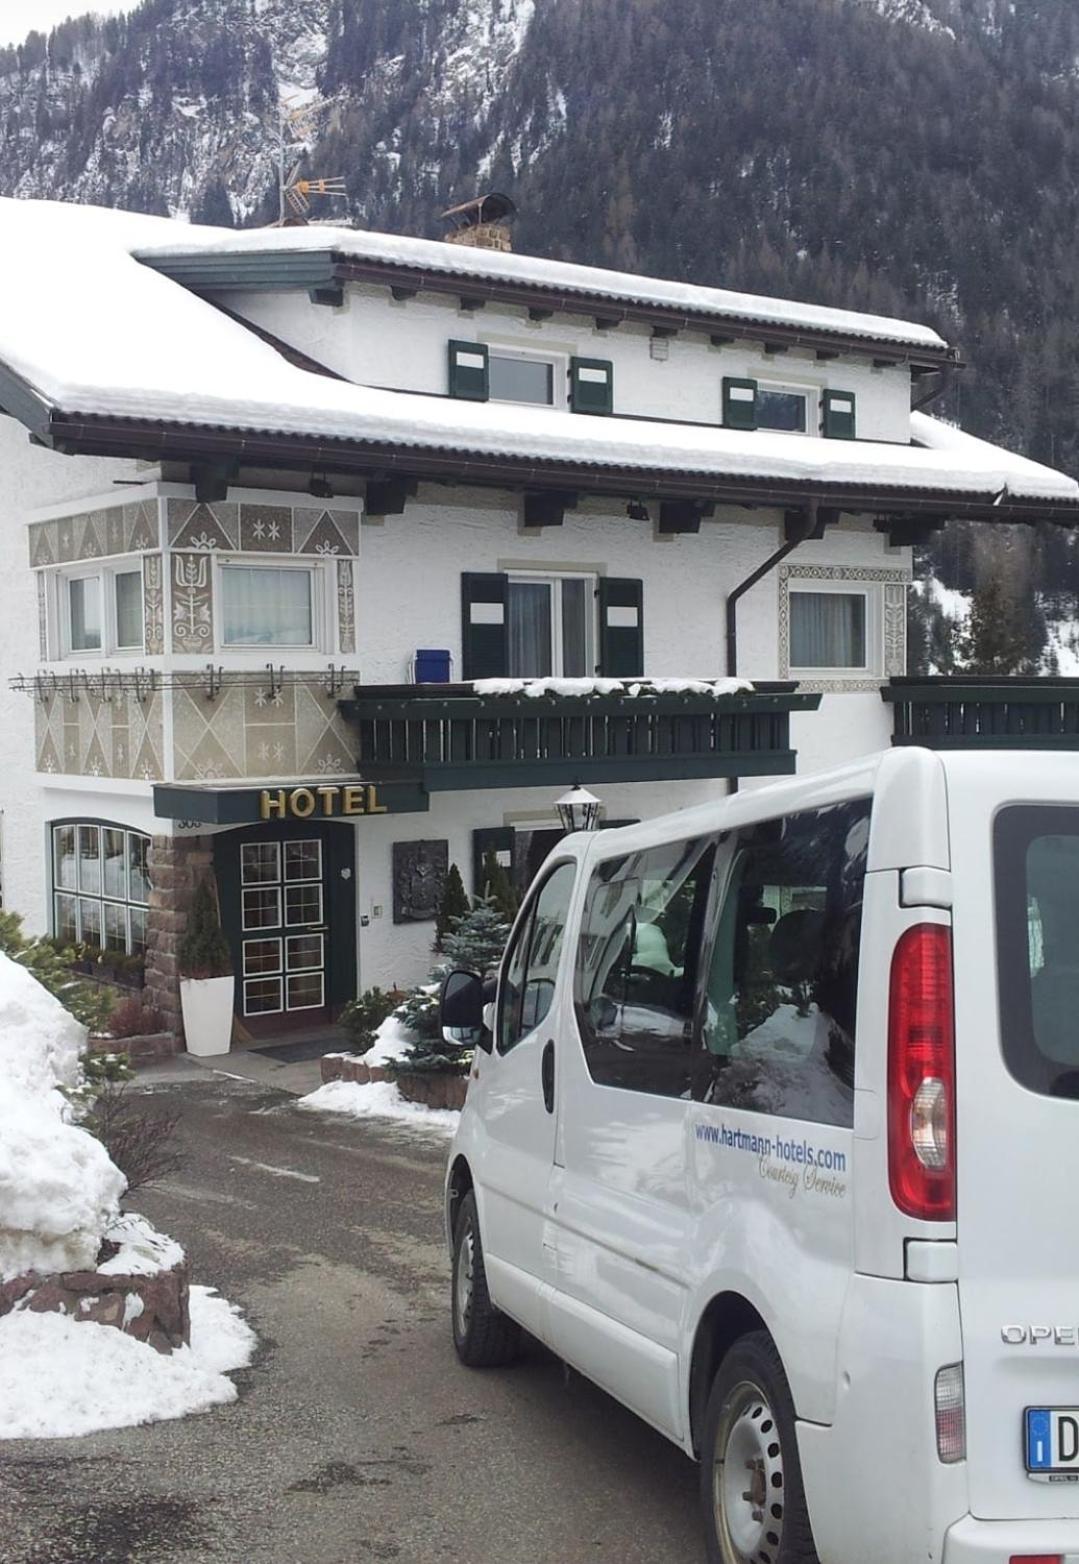 Chalet Hotel Hartmann - Adults Only Ortisei Exterior photo